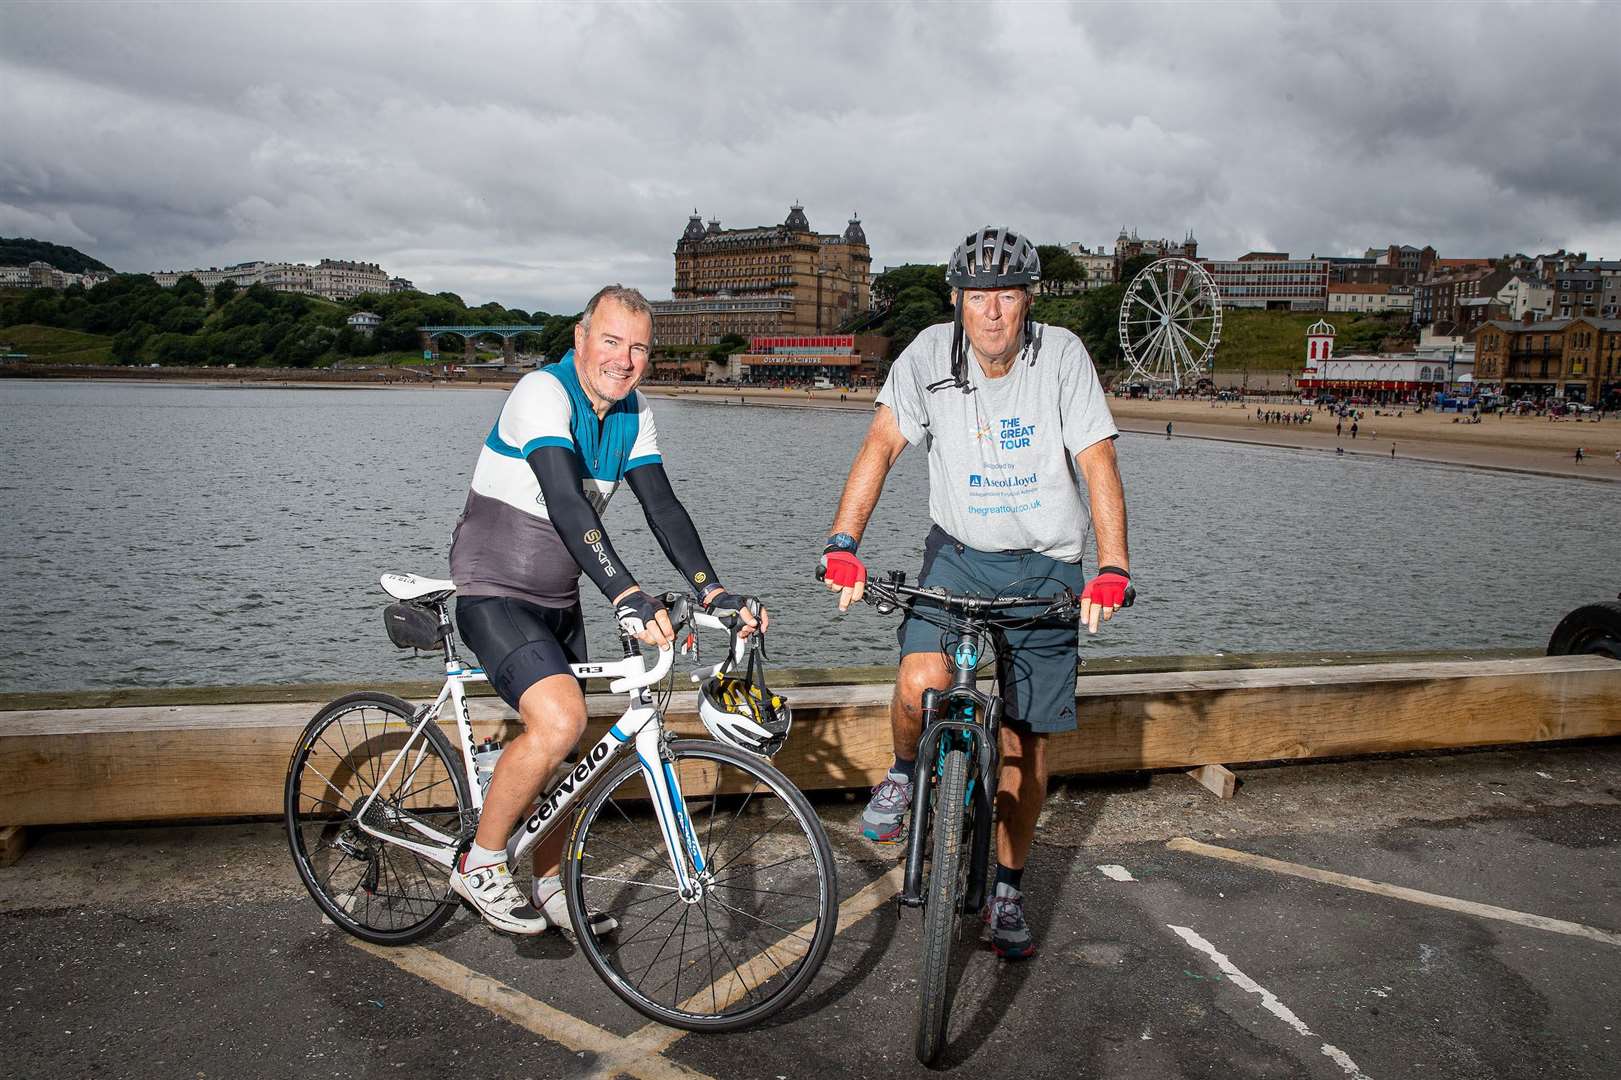 Hugh Roberts (right) and Robin Young are taking part in the cycle event.